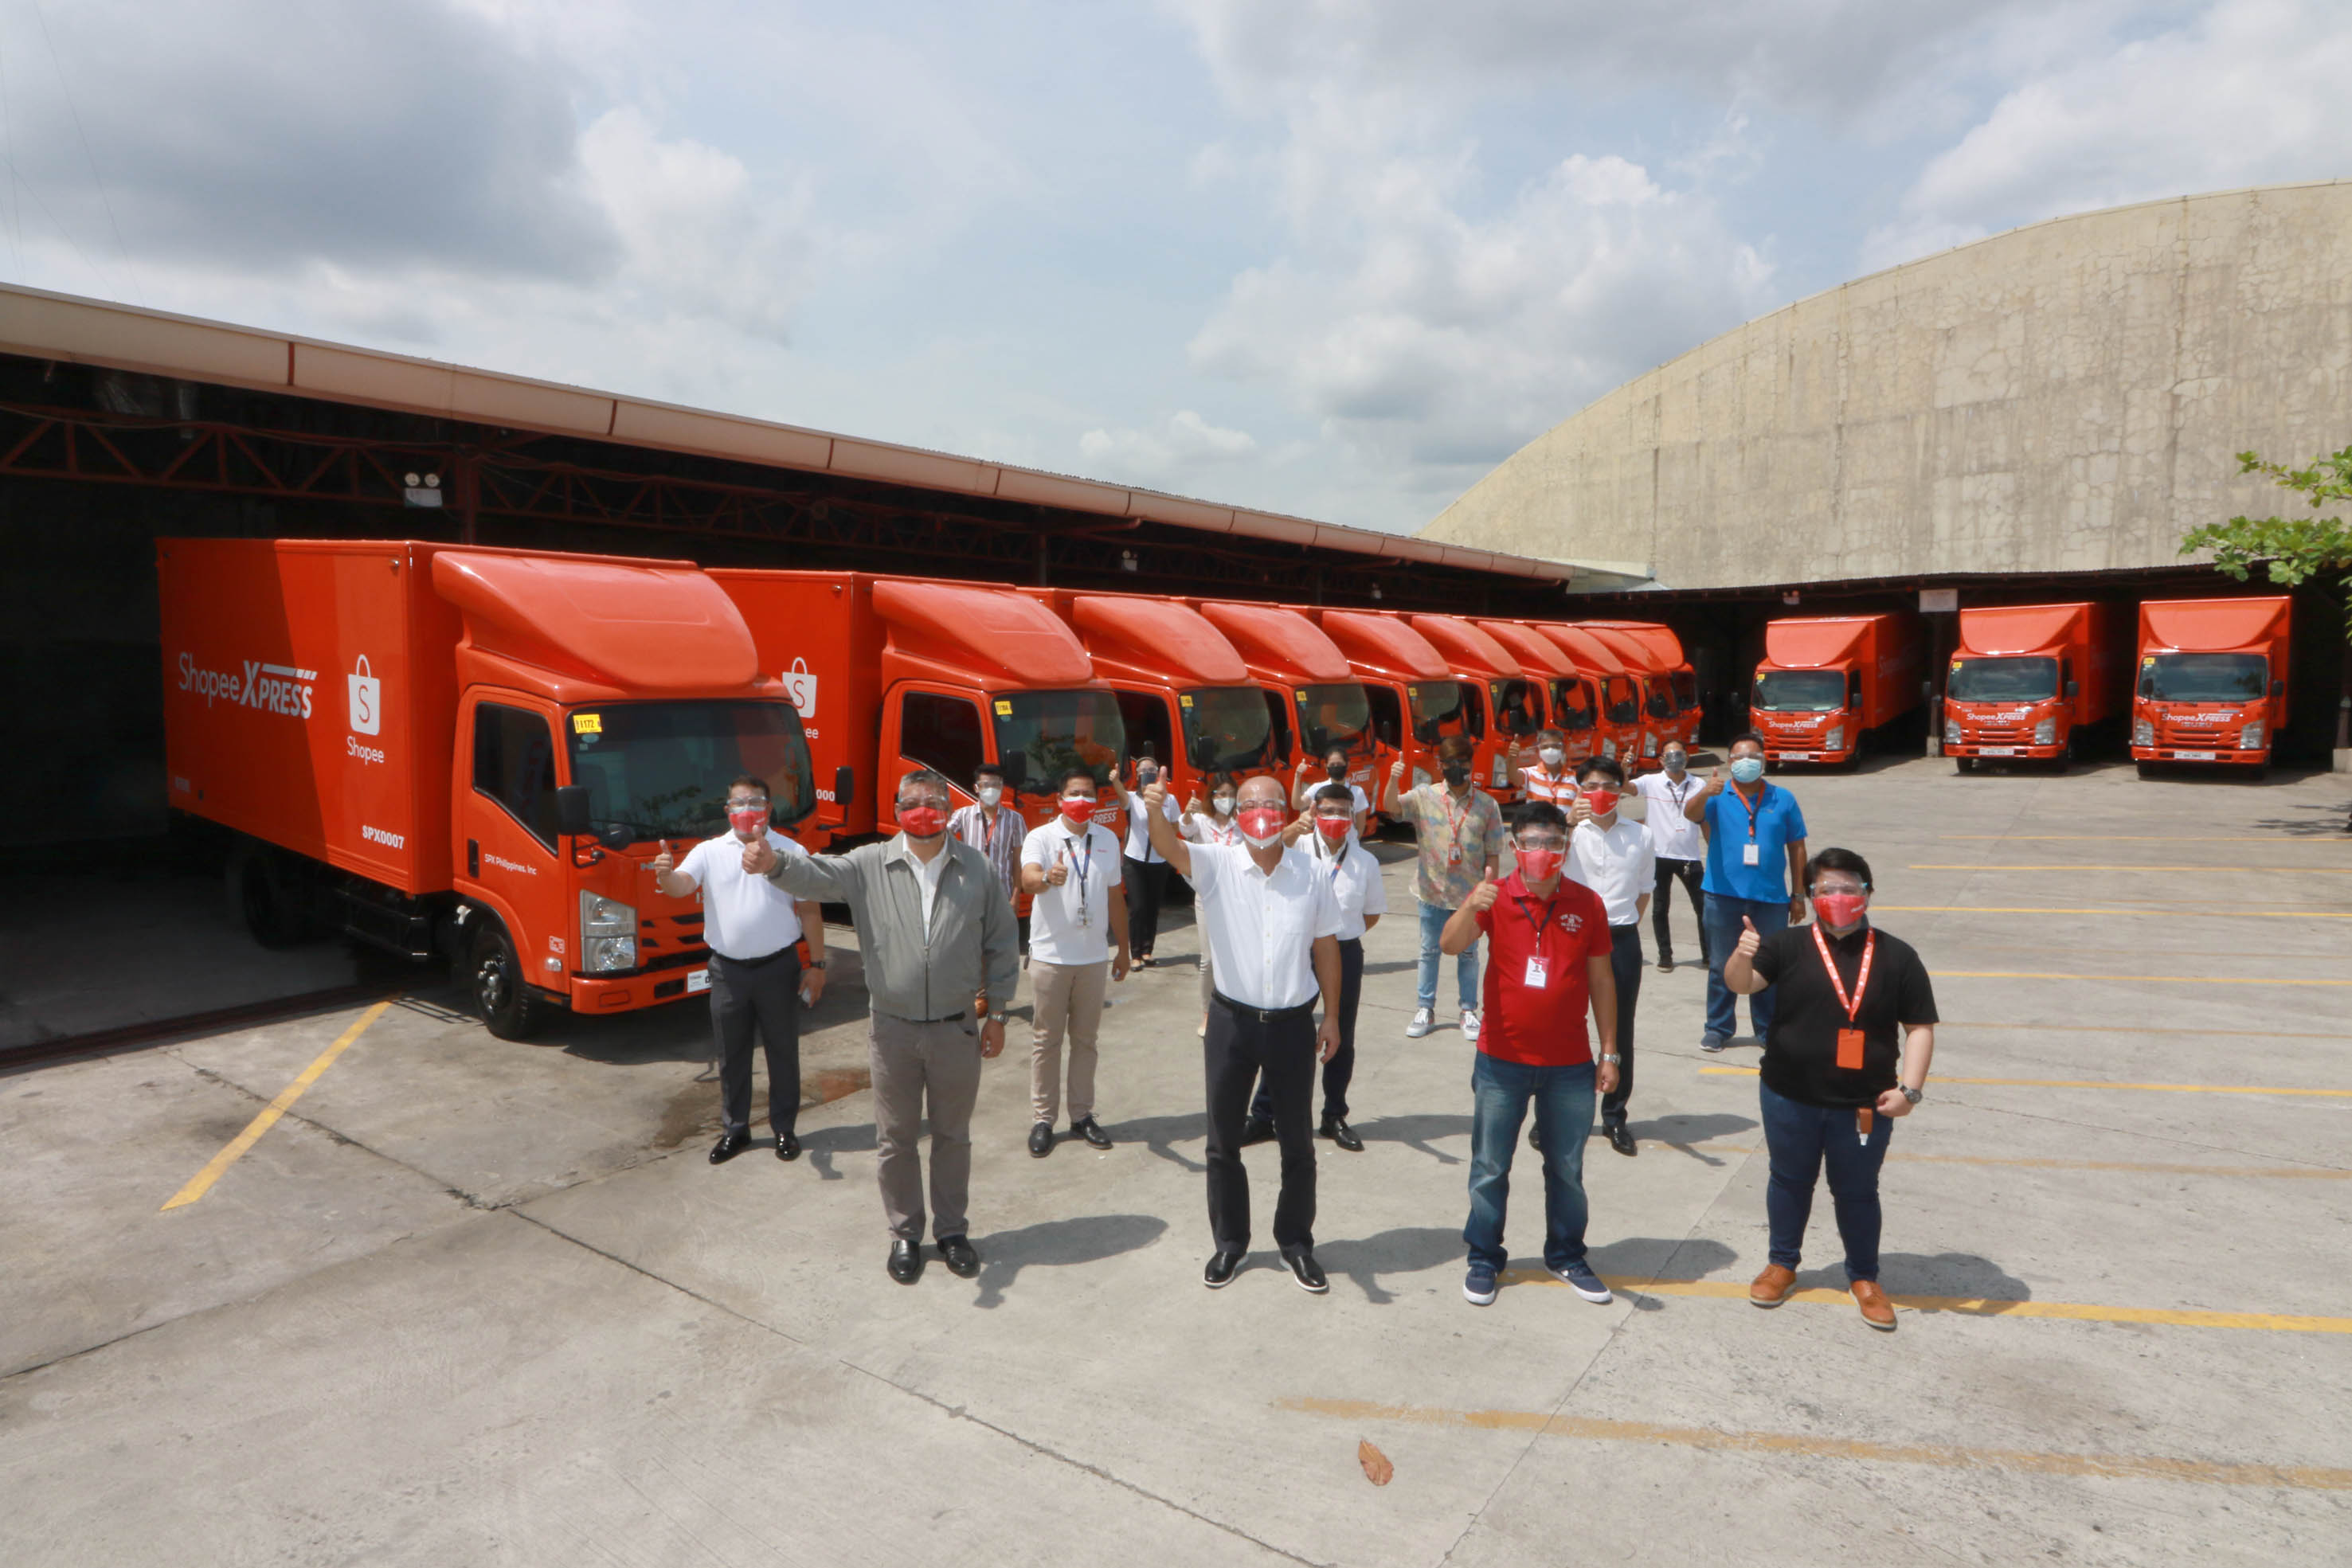 SHOPEE DELIVERIES NOW MADE EVEN MORE RELIABLE WITH ISUZU image